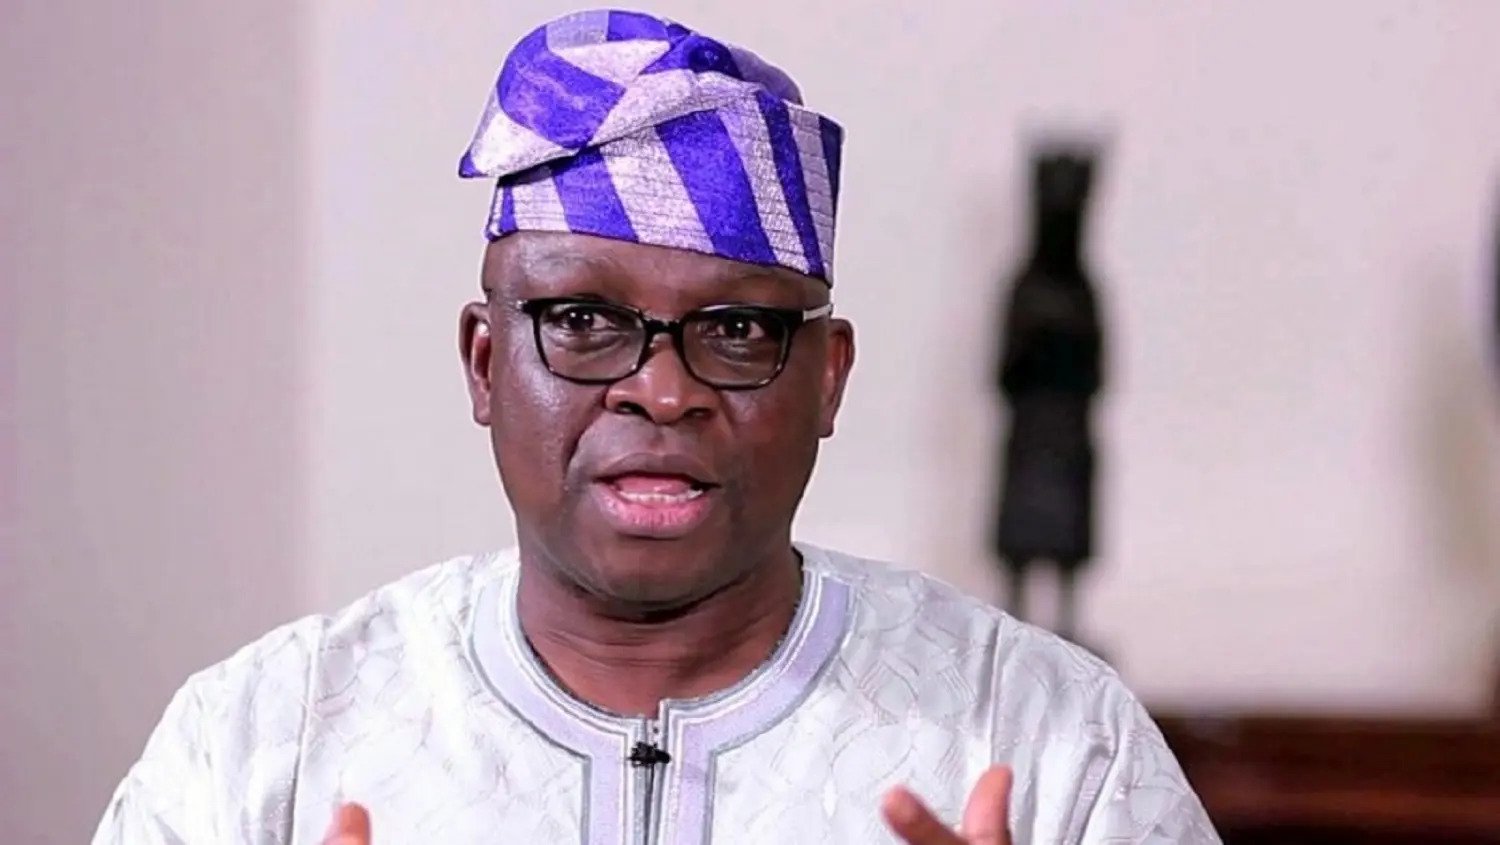 Fayose insists those planning to unseat Tinubu as Nigeria’s President are daydreaming